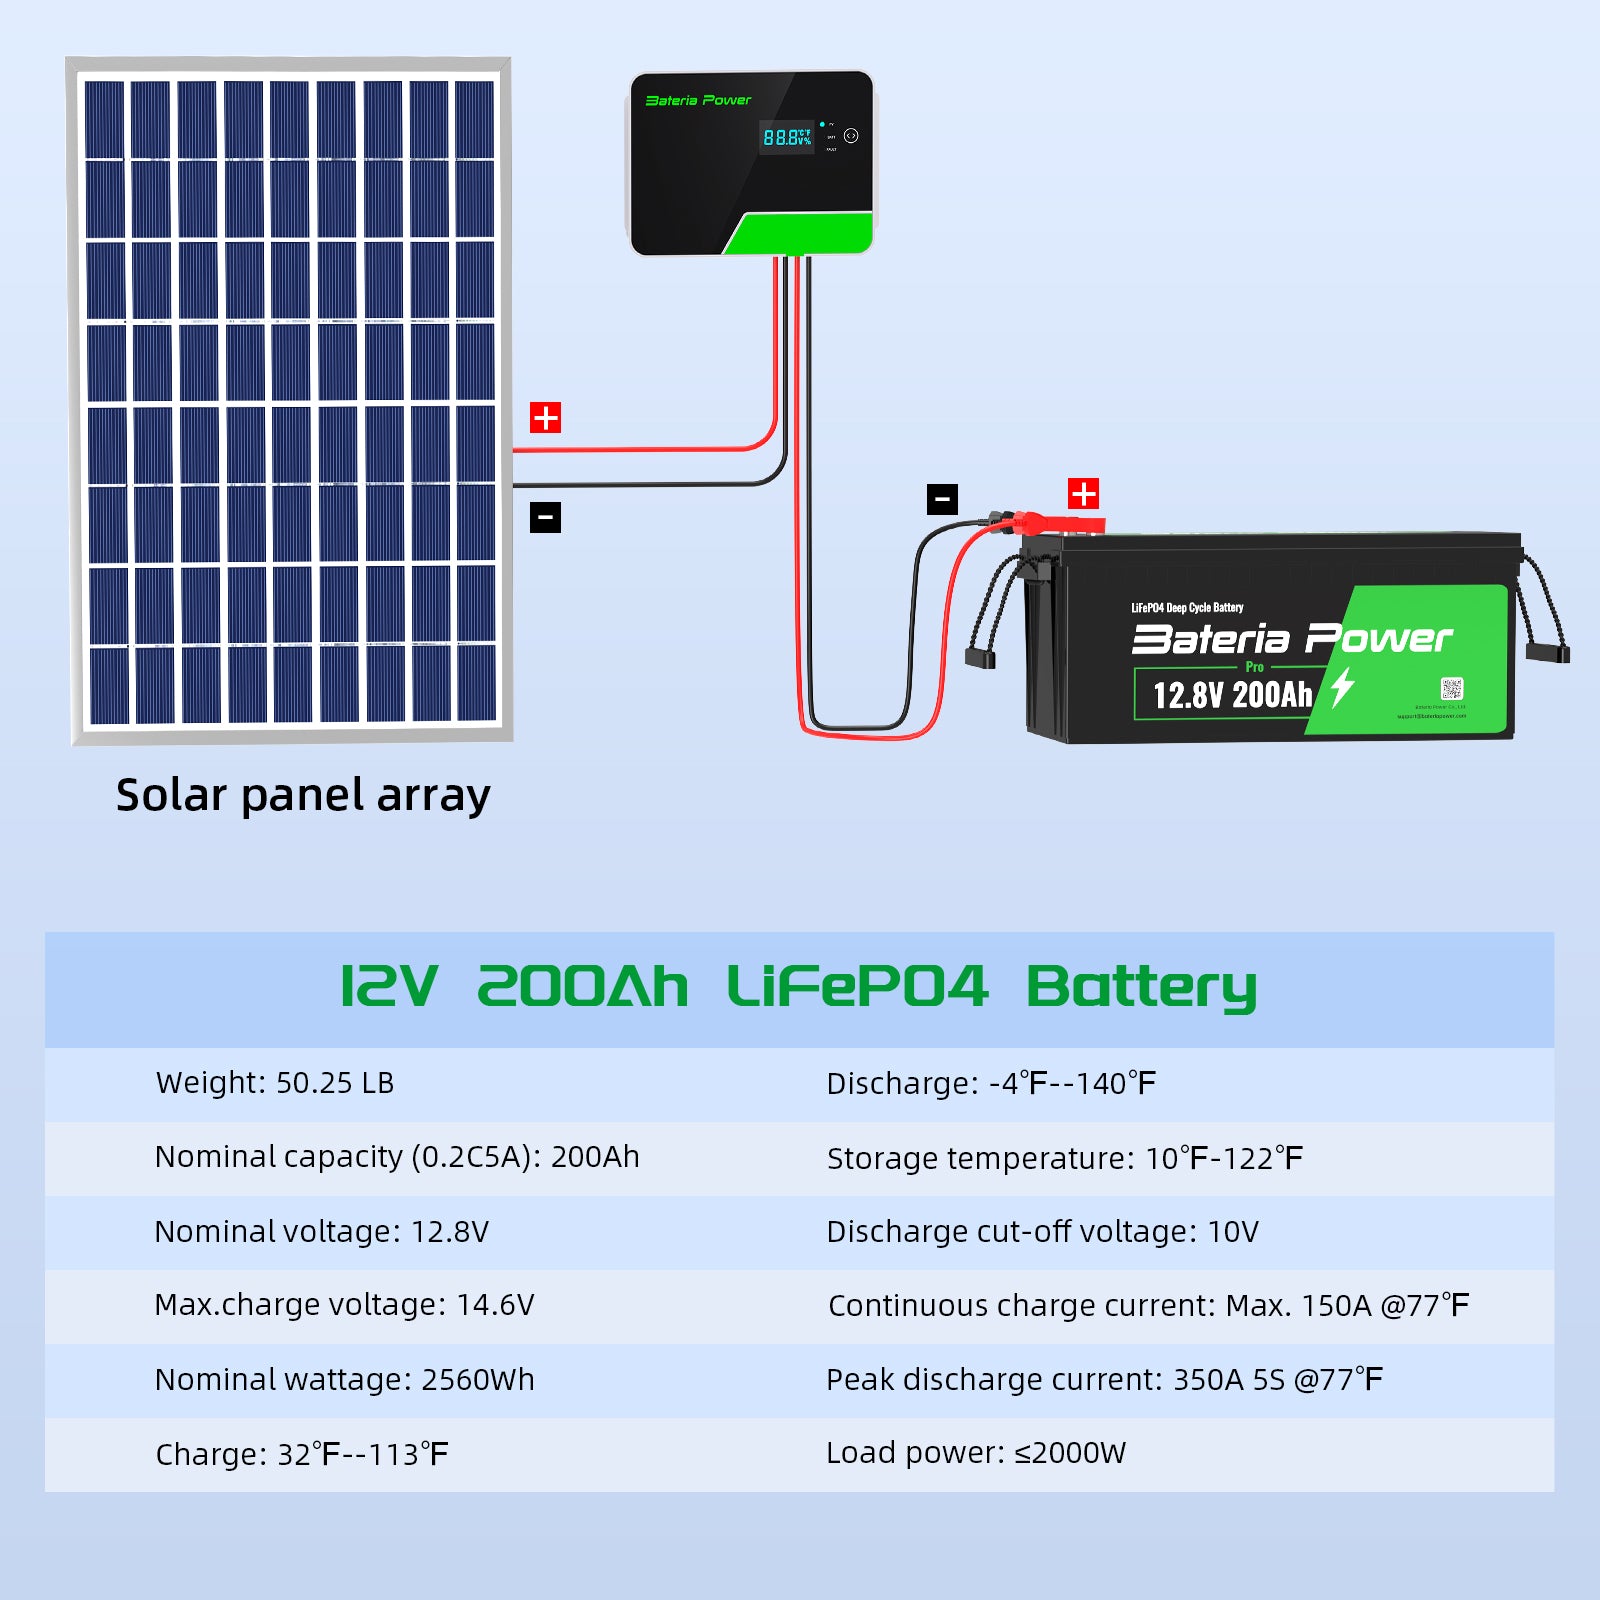 12v lithium battery uilt-in 200A BMS, Support in Series/Parallel, widely Used for Solar Home System, RV, Off-Grid Life.